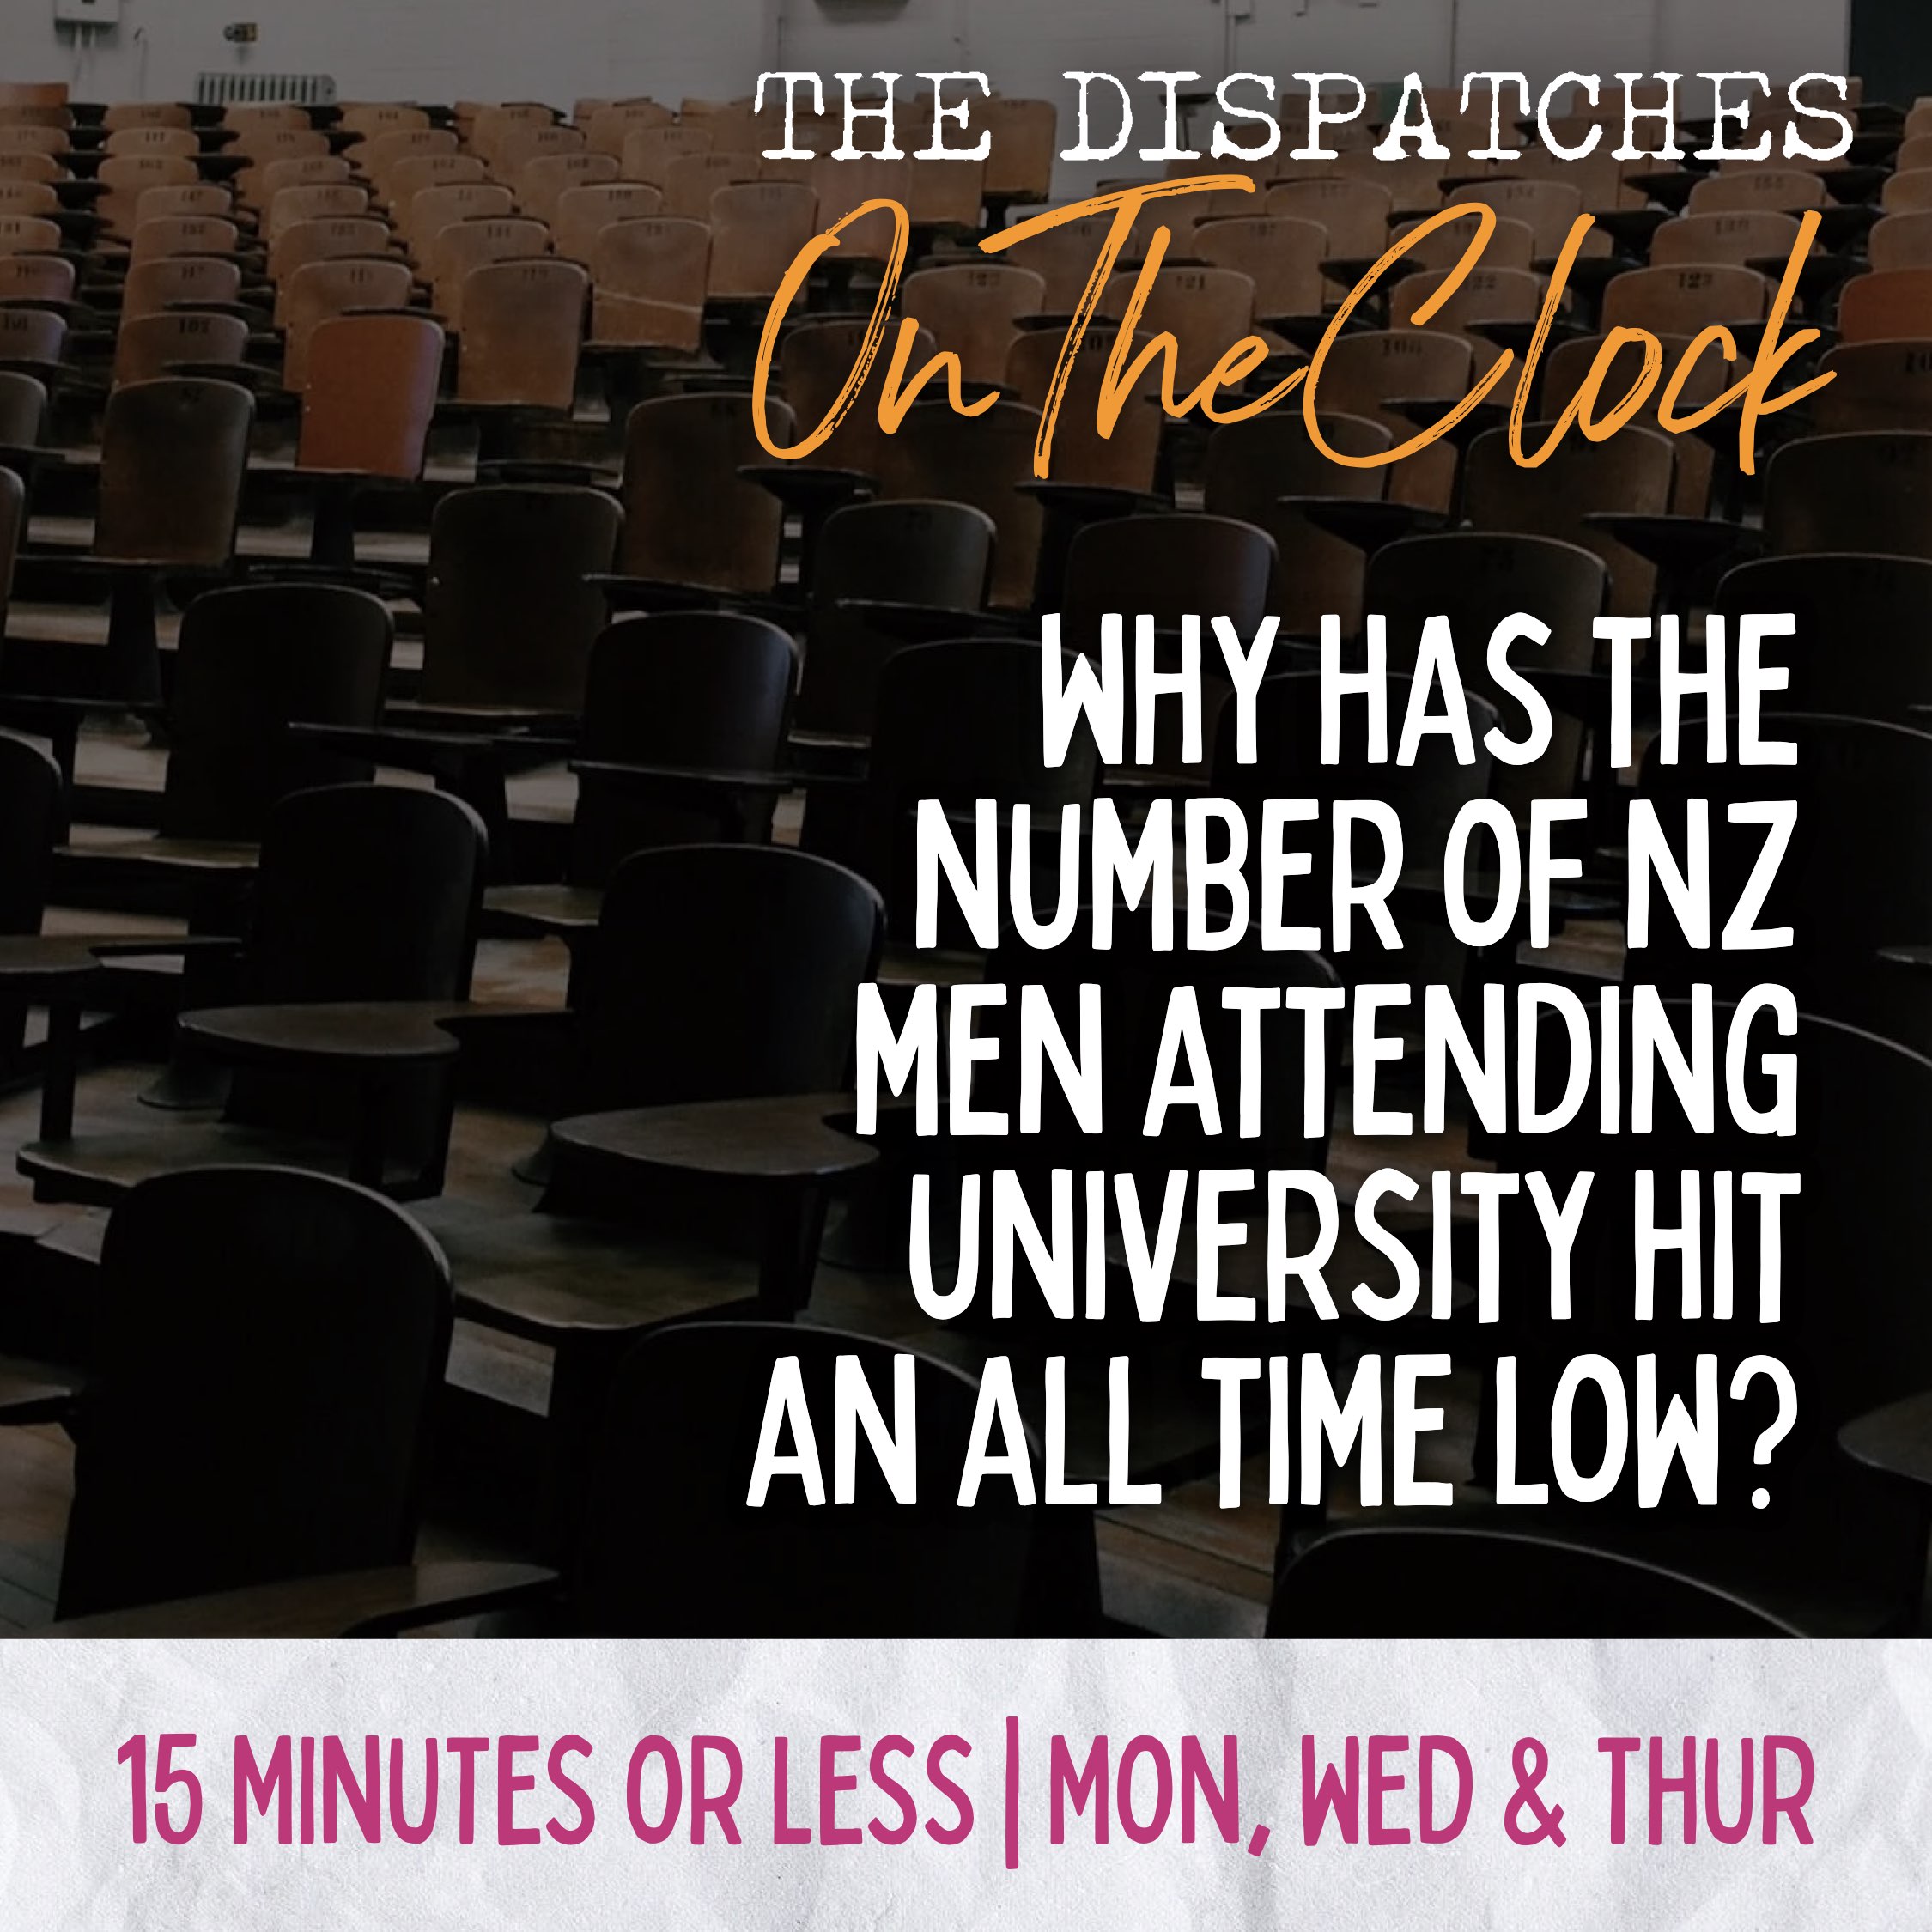 ON THE CLOCK | Why Has the Number of NZ Men Attending University Hit an All Time Low?